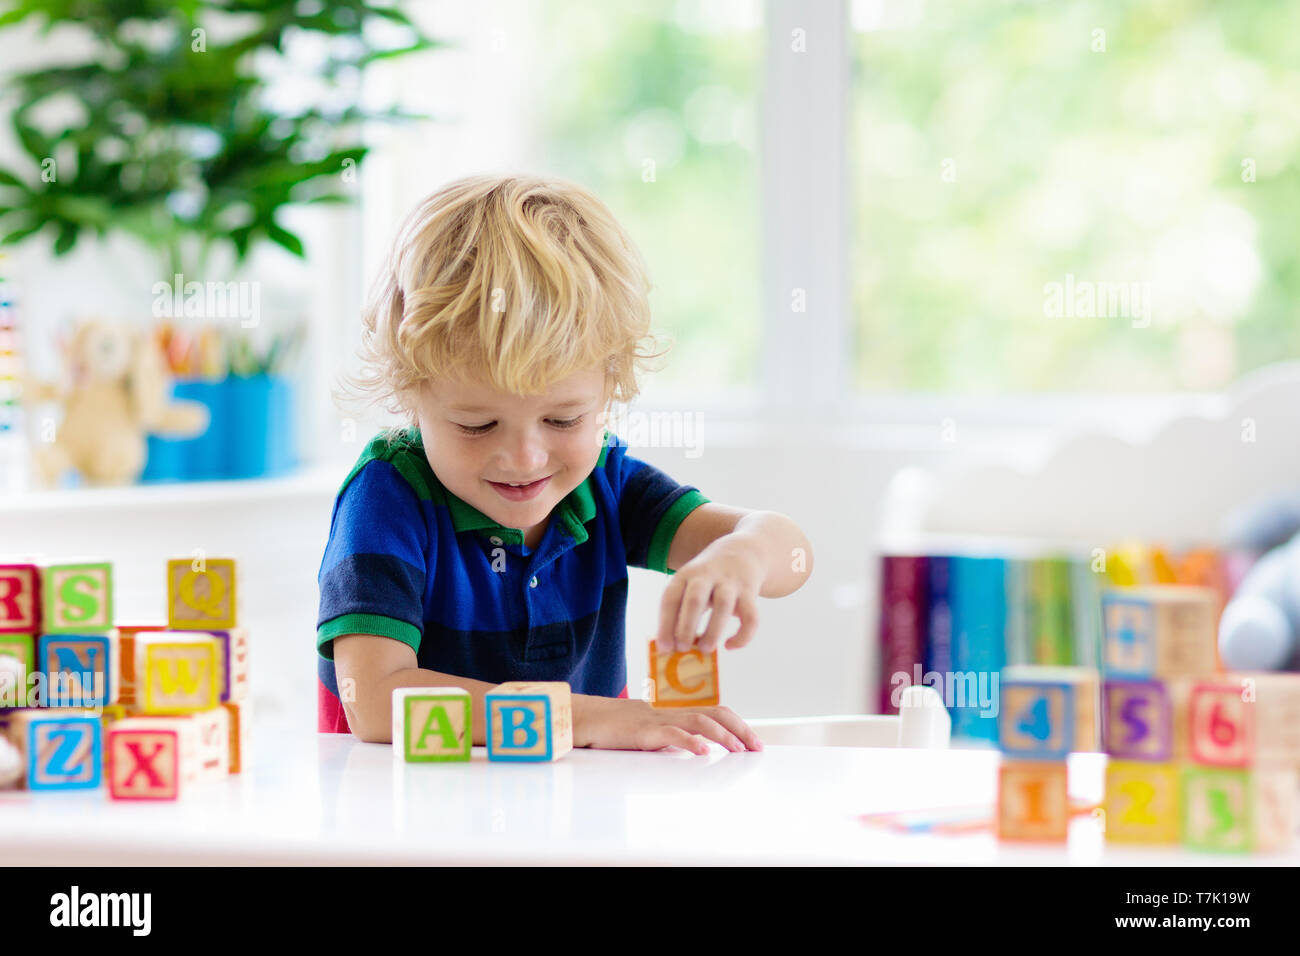 Child learning letters and numbers. Kid with colorful wooden abc ...